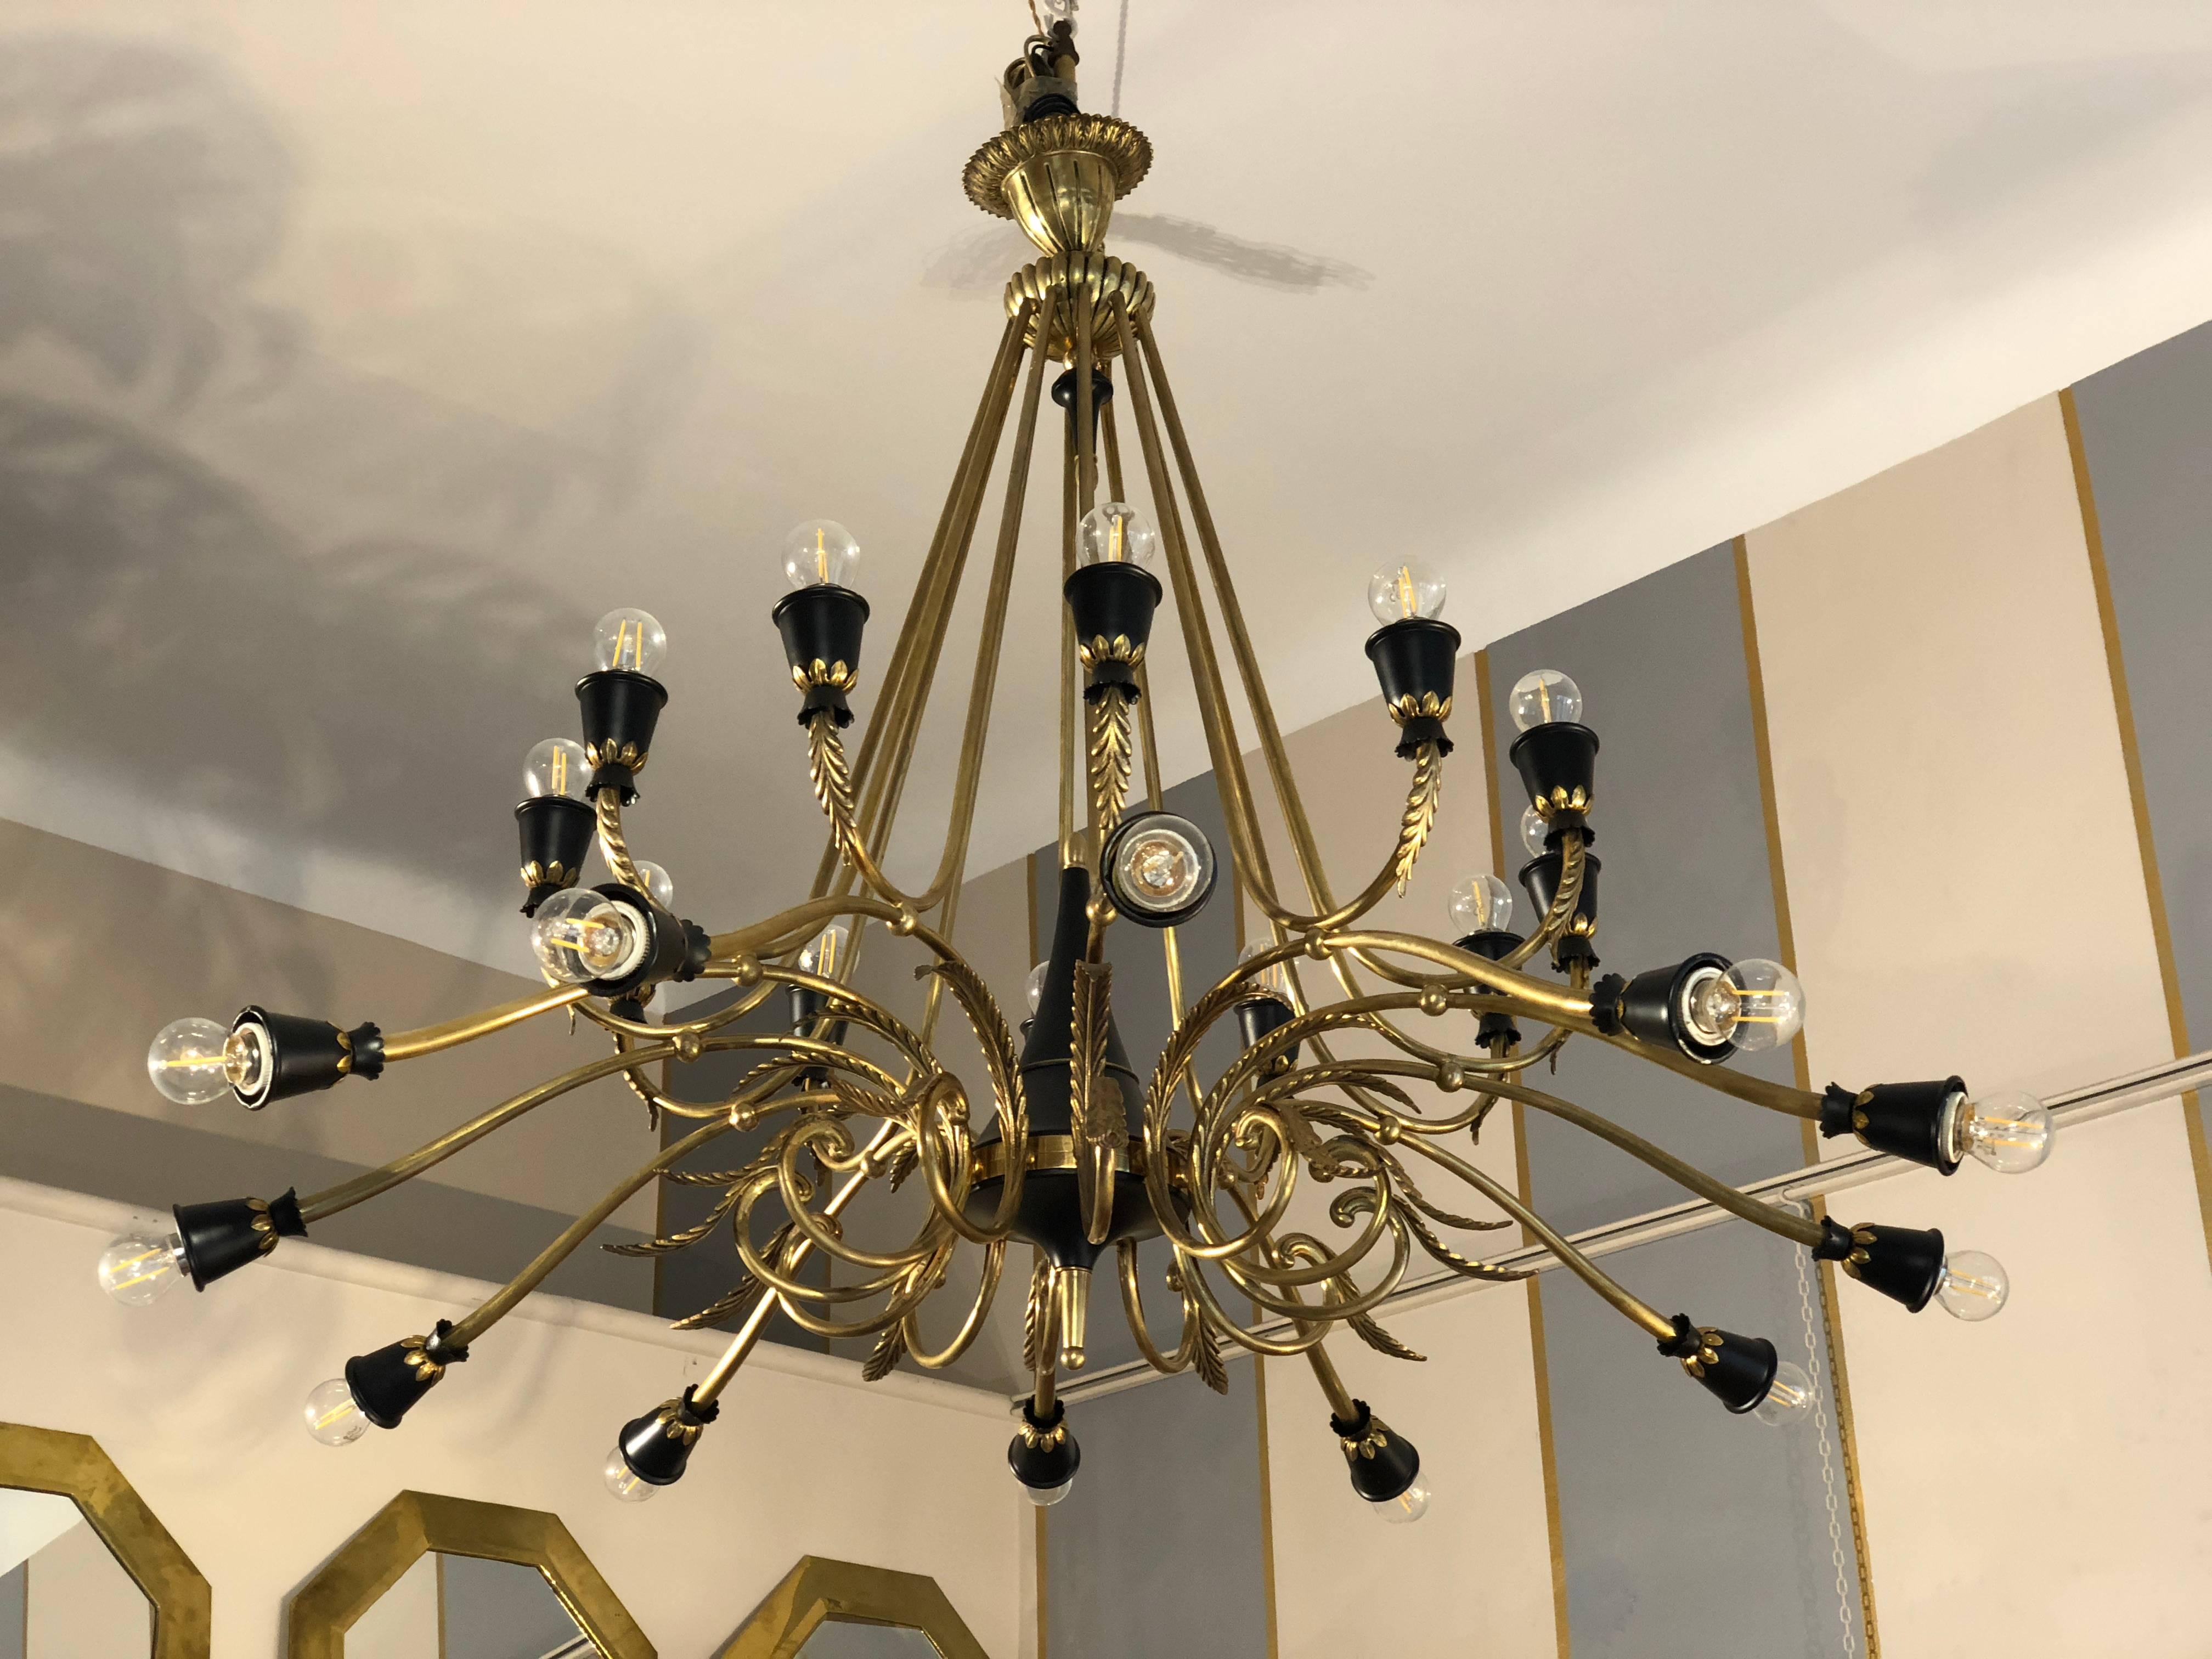 Brass chandelier, from Italy from 1950s period, 24 lights. It is composed by two separate lines of lights pointing upwards and downwards. There are 24 brass arms, one each bulb, each ending with a black light holder. This makes this chandelier